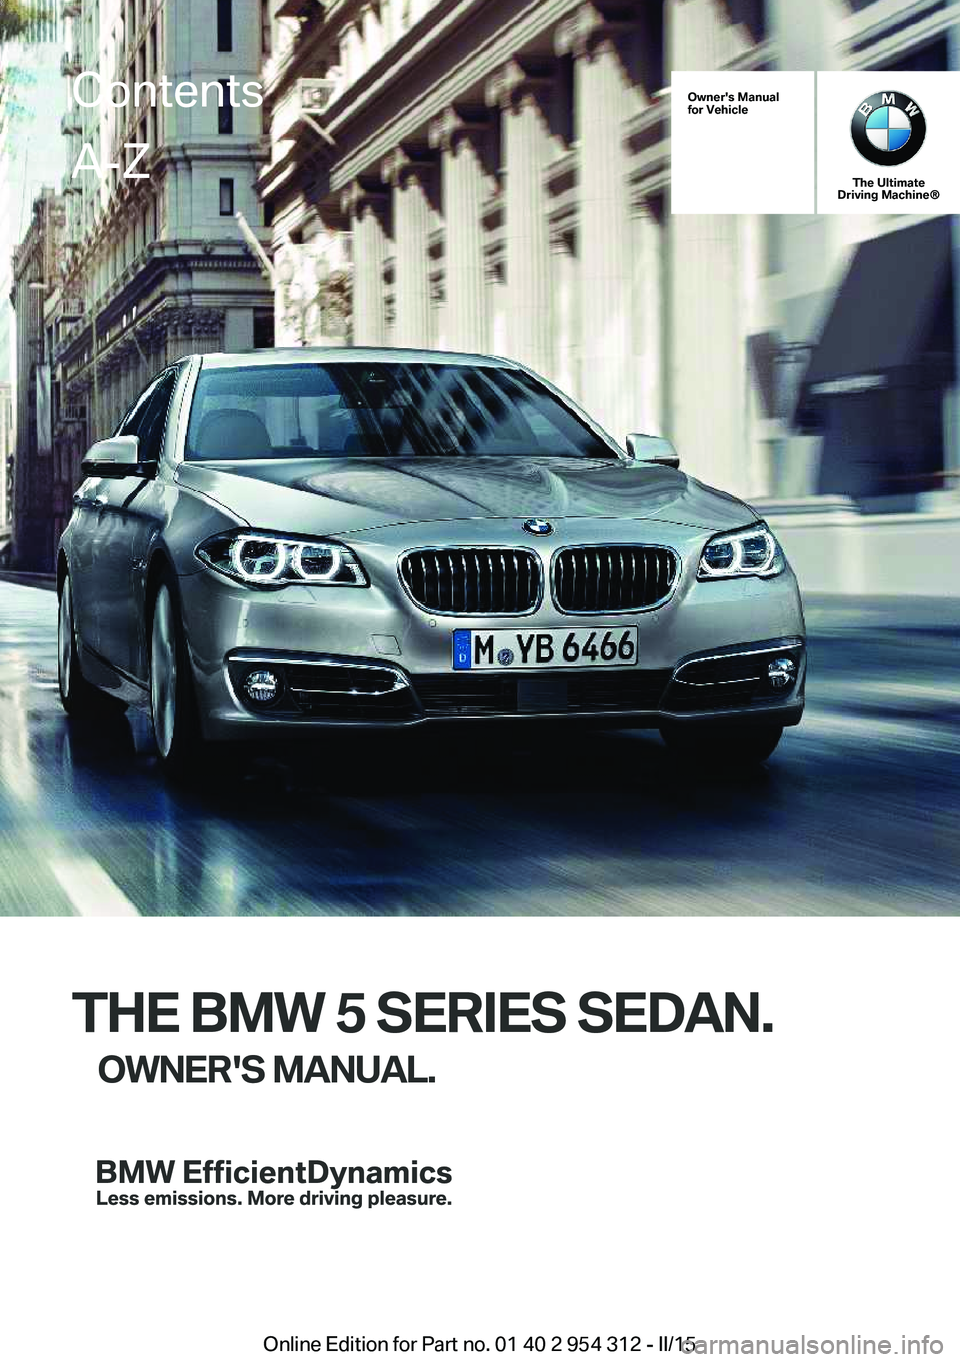 BMW 550I XDRIVE SEDAN 2016  Owners Manual Owner's Manual
for Vehicle
The Ultimate
Driving Machine®
THE BMW 5 SERIES SEDAN.
OWNER'S MANUAL.
ContentsA-Z
Online Edition for Part no. 01 40 2 954 312 - II/15   